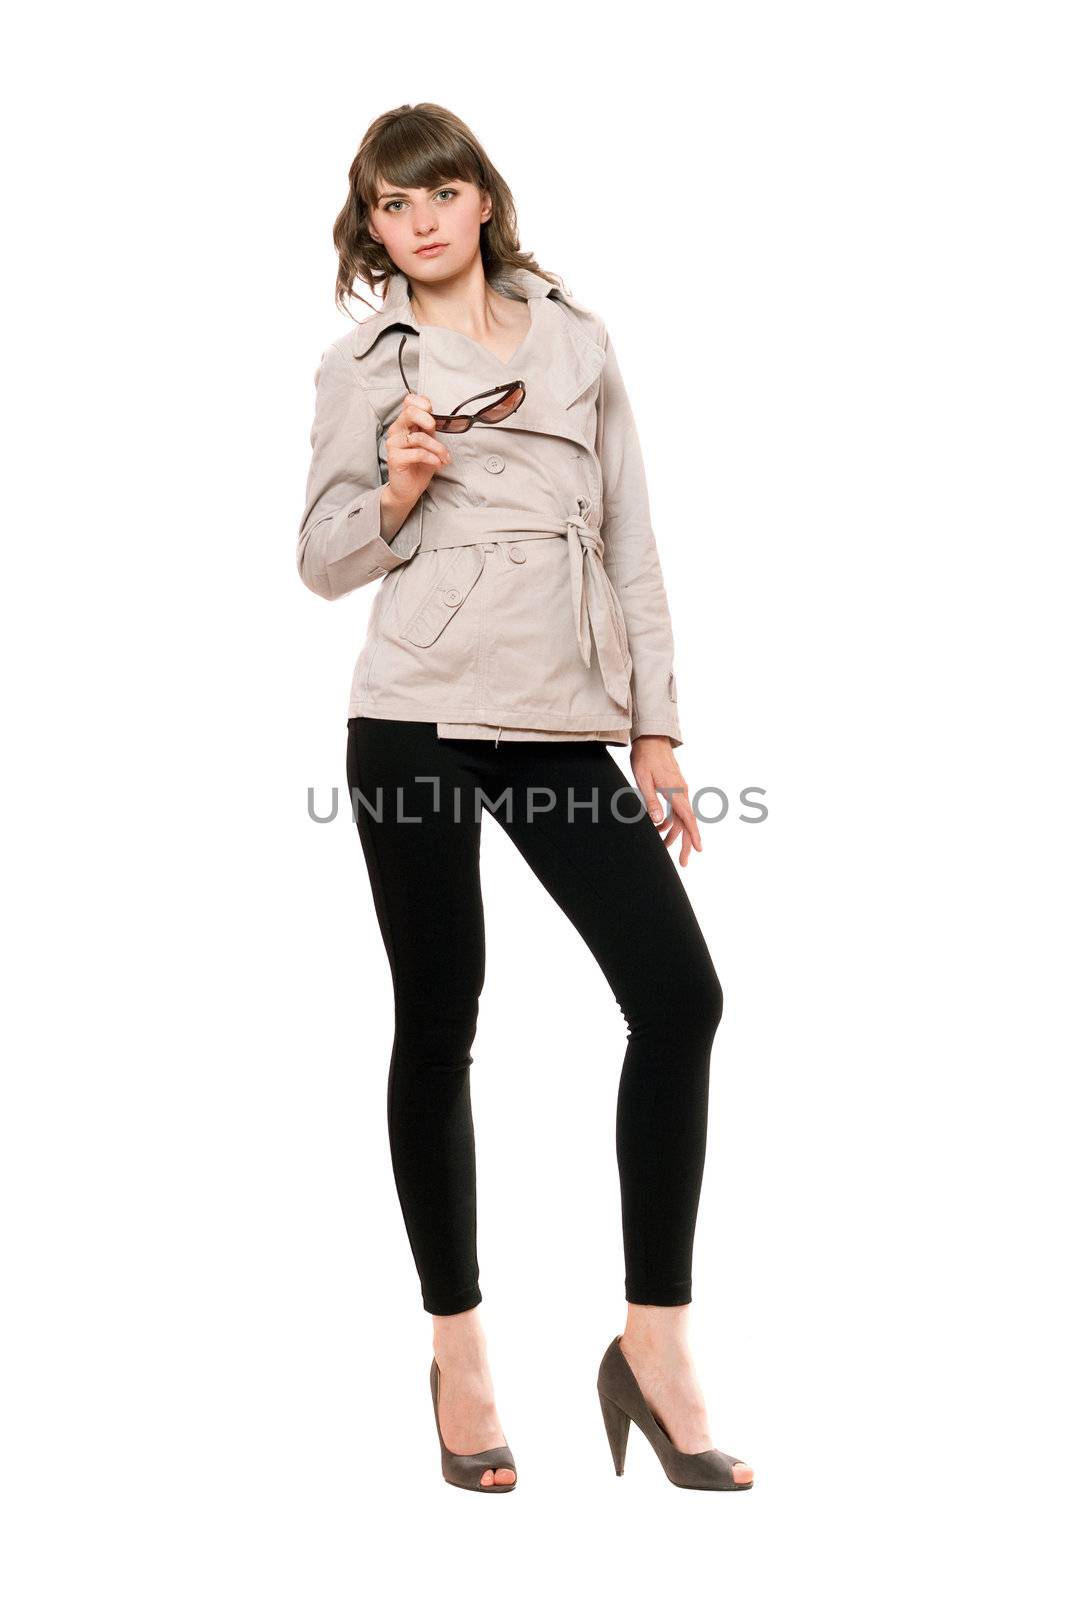 Attractive girl wearing a coat and black leggings. Isolated on white